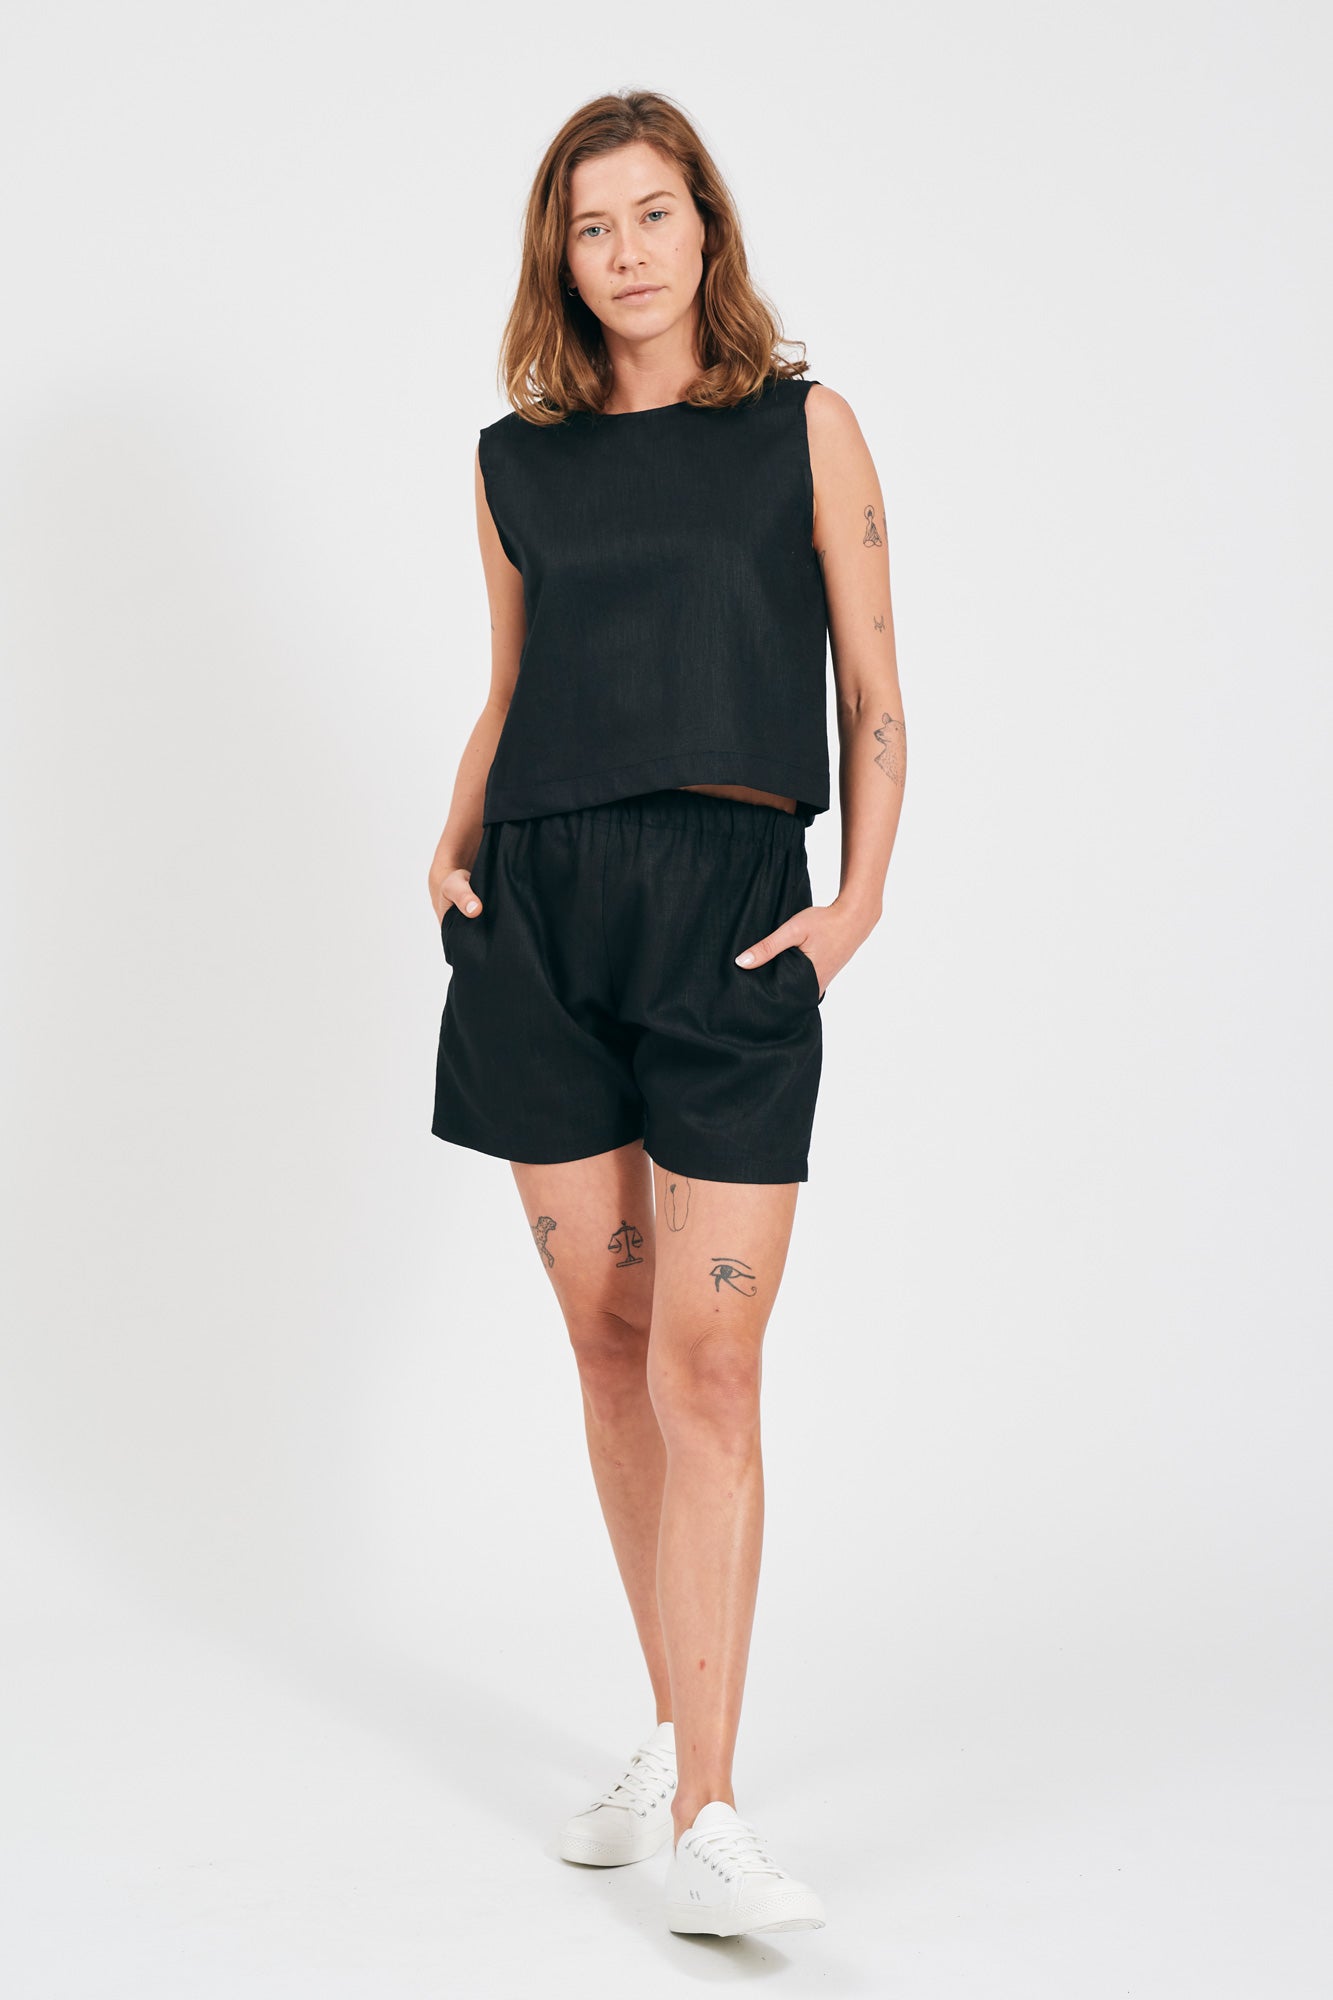 SHIO Summer Shorts arrive in 100% linen or upcycled cotton.